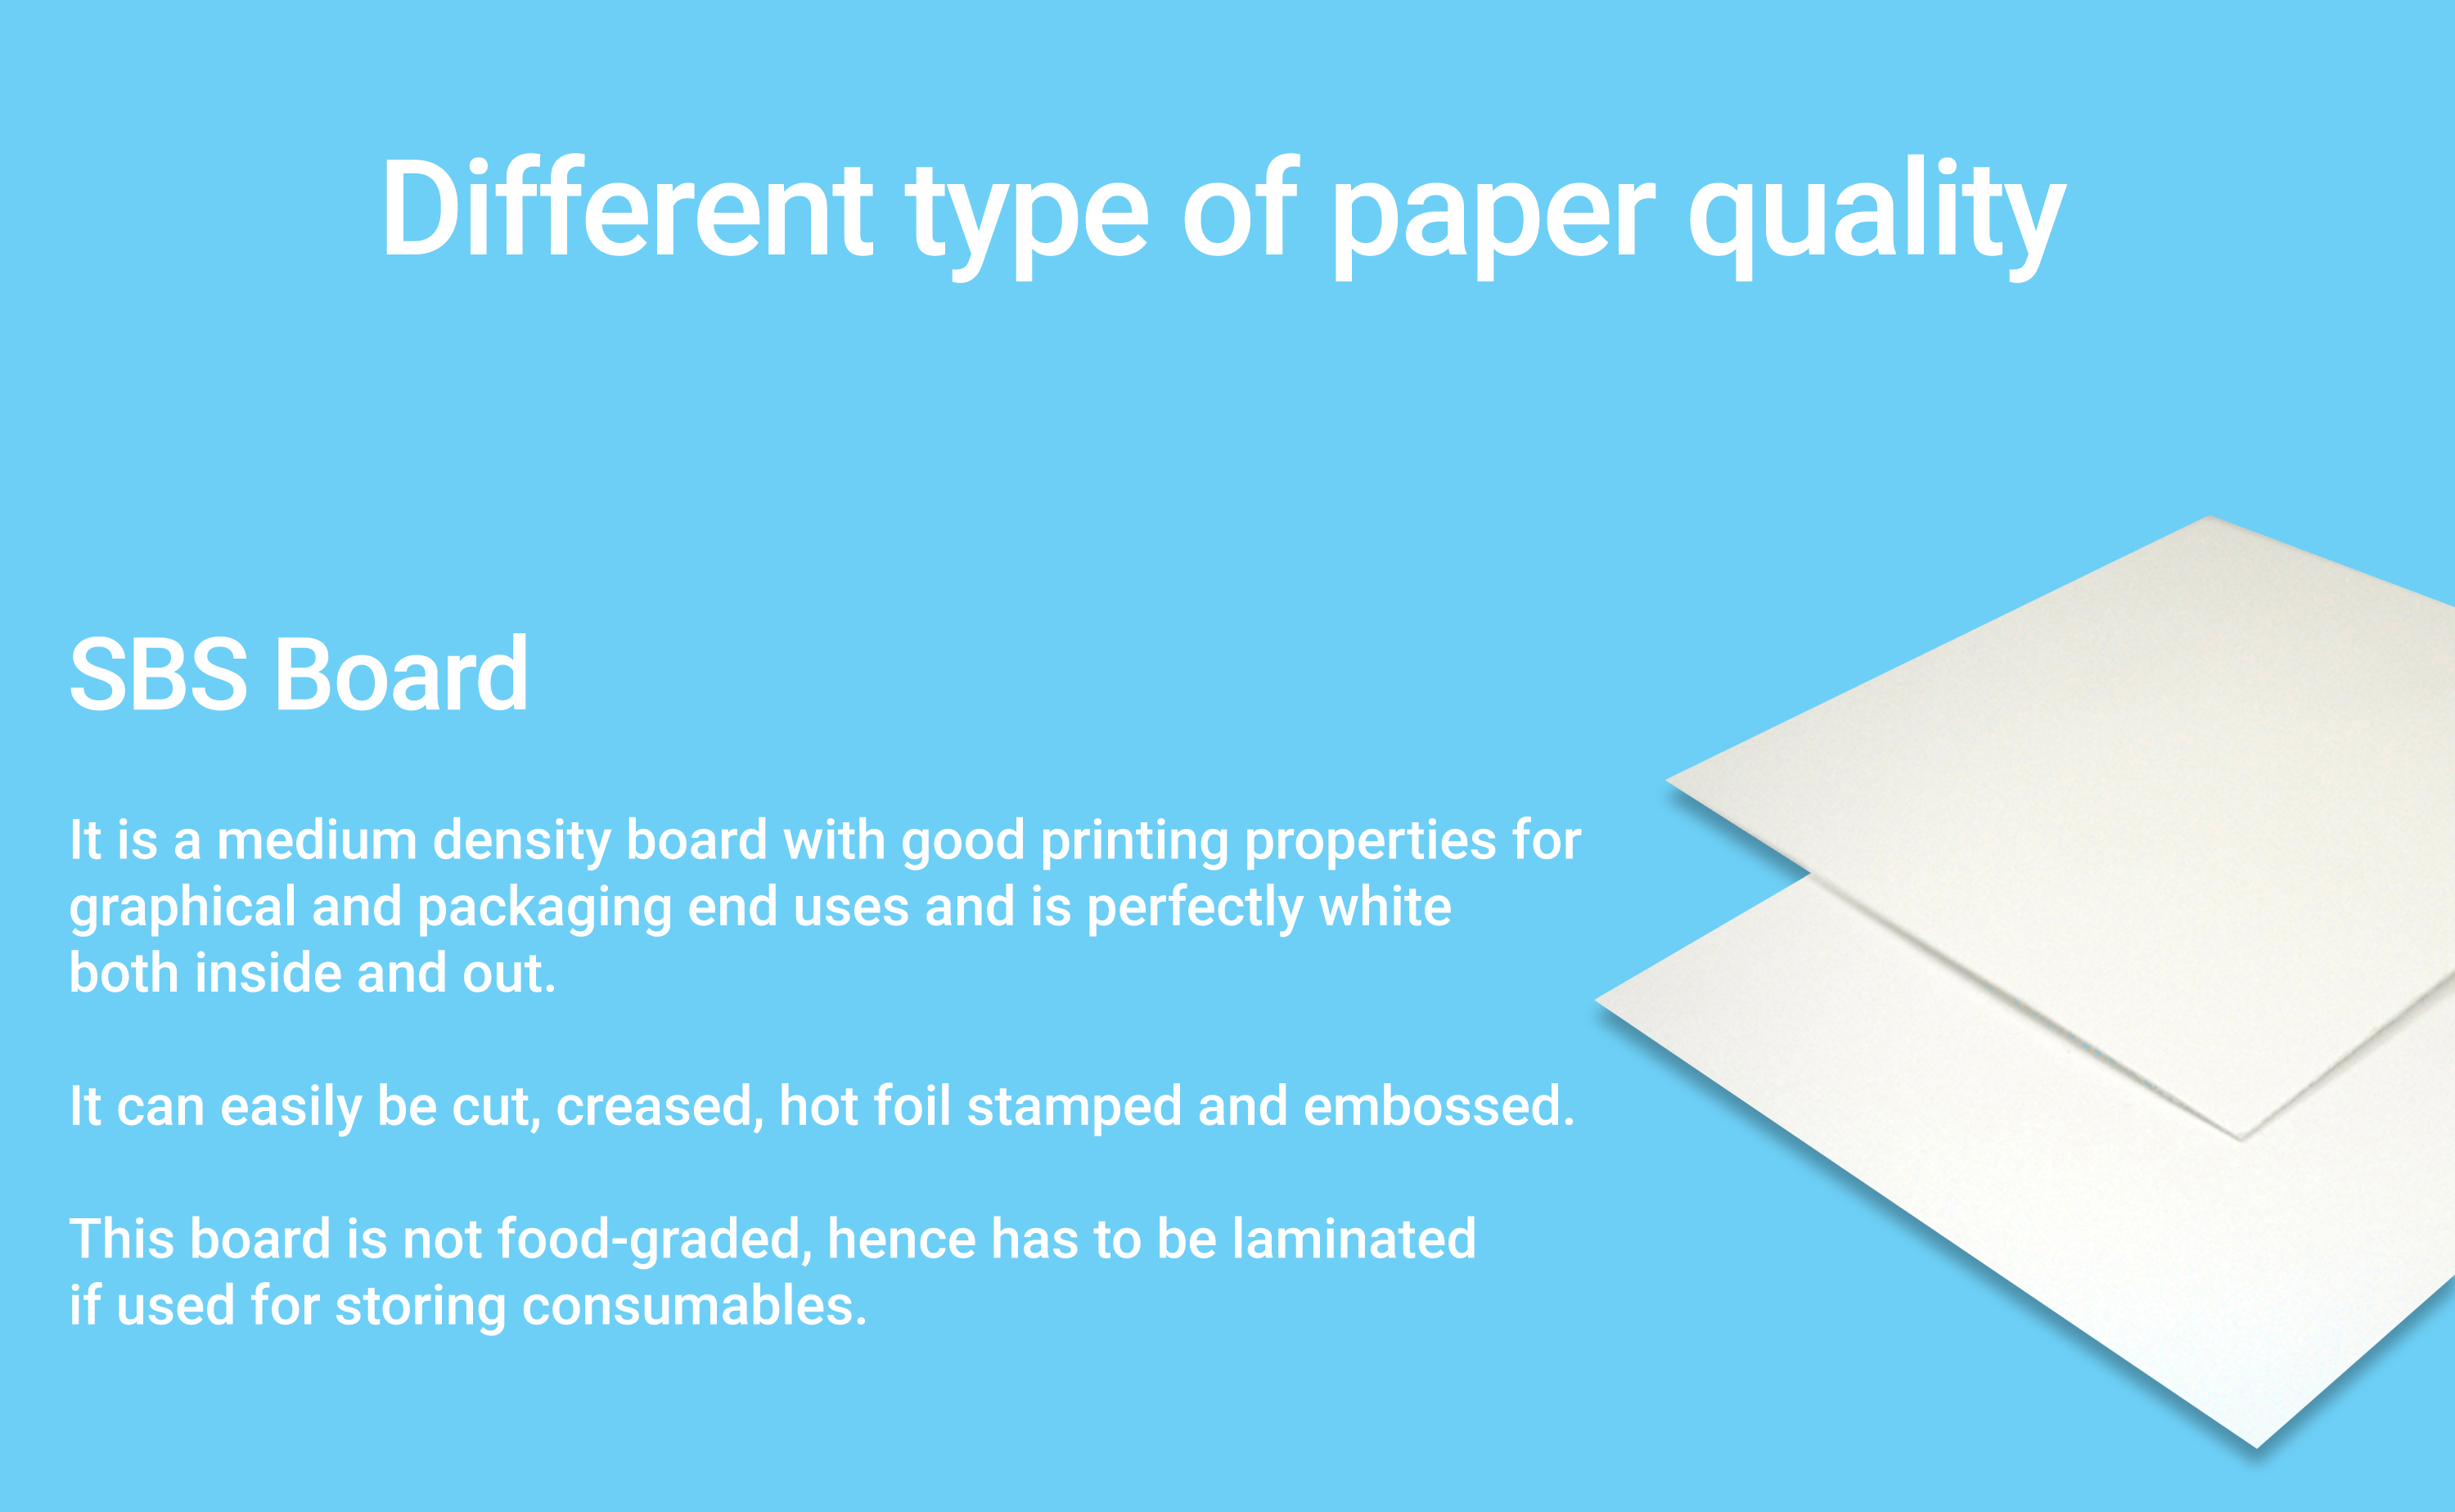 Different Type of Paper Quality Image